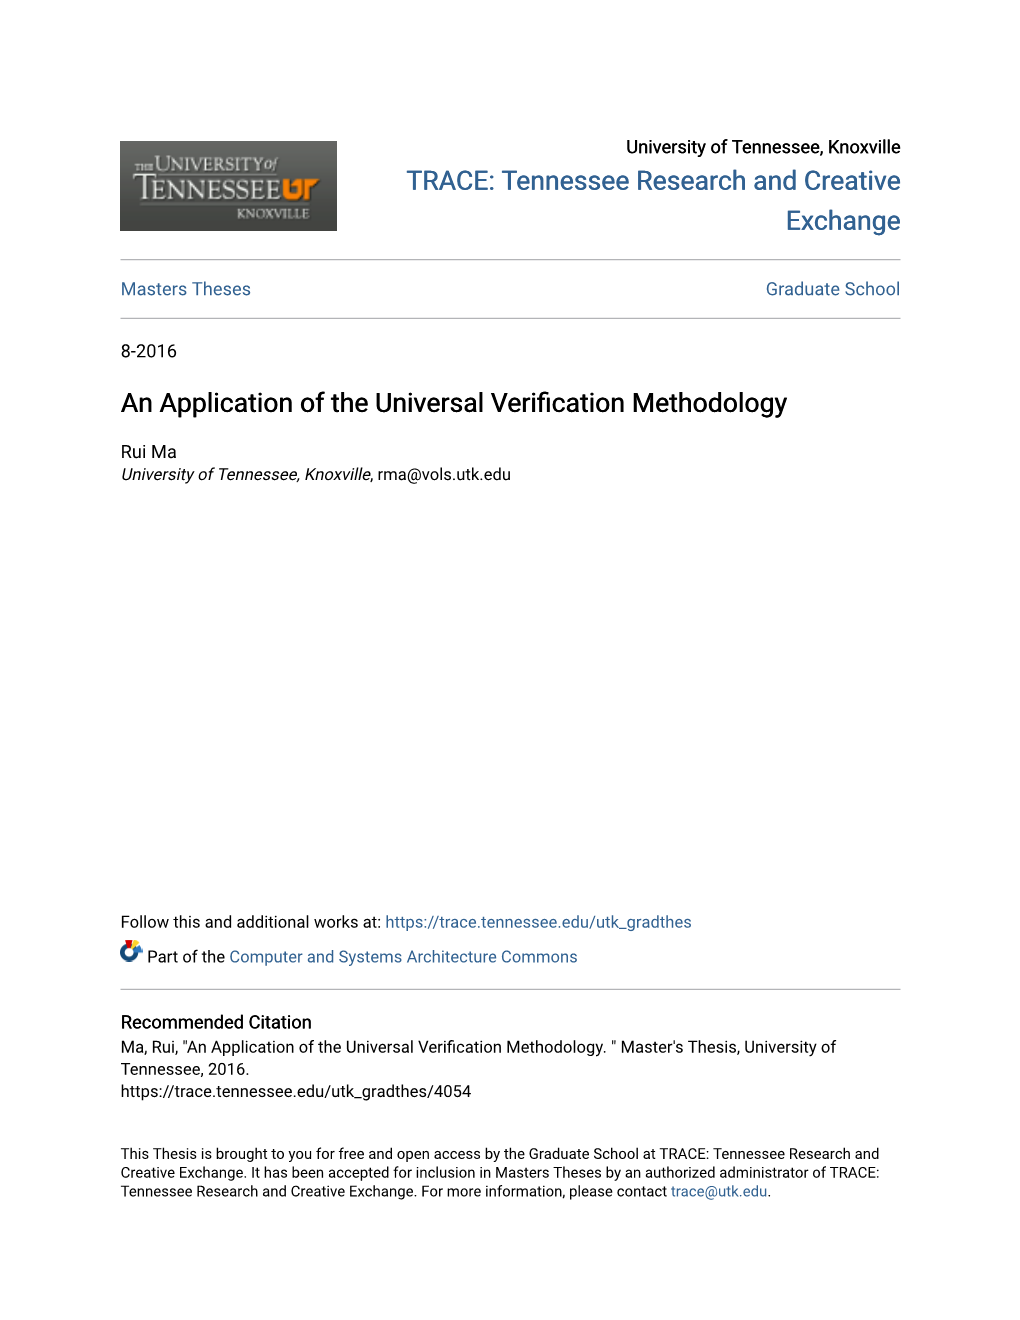 An Application of the Universal Verification Methodology